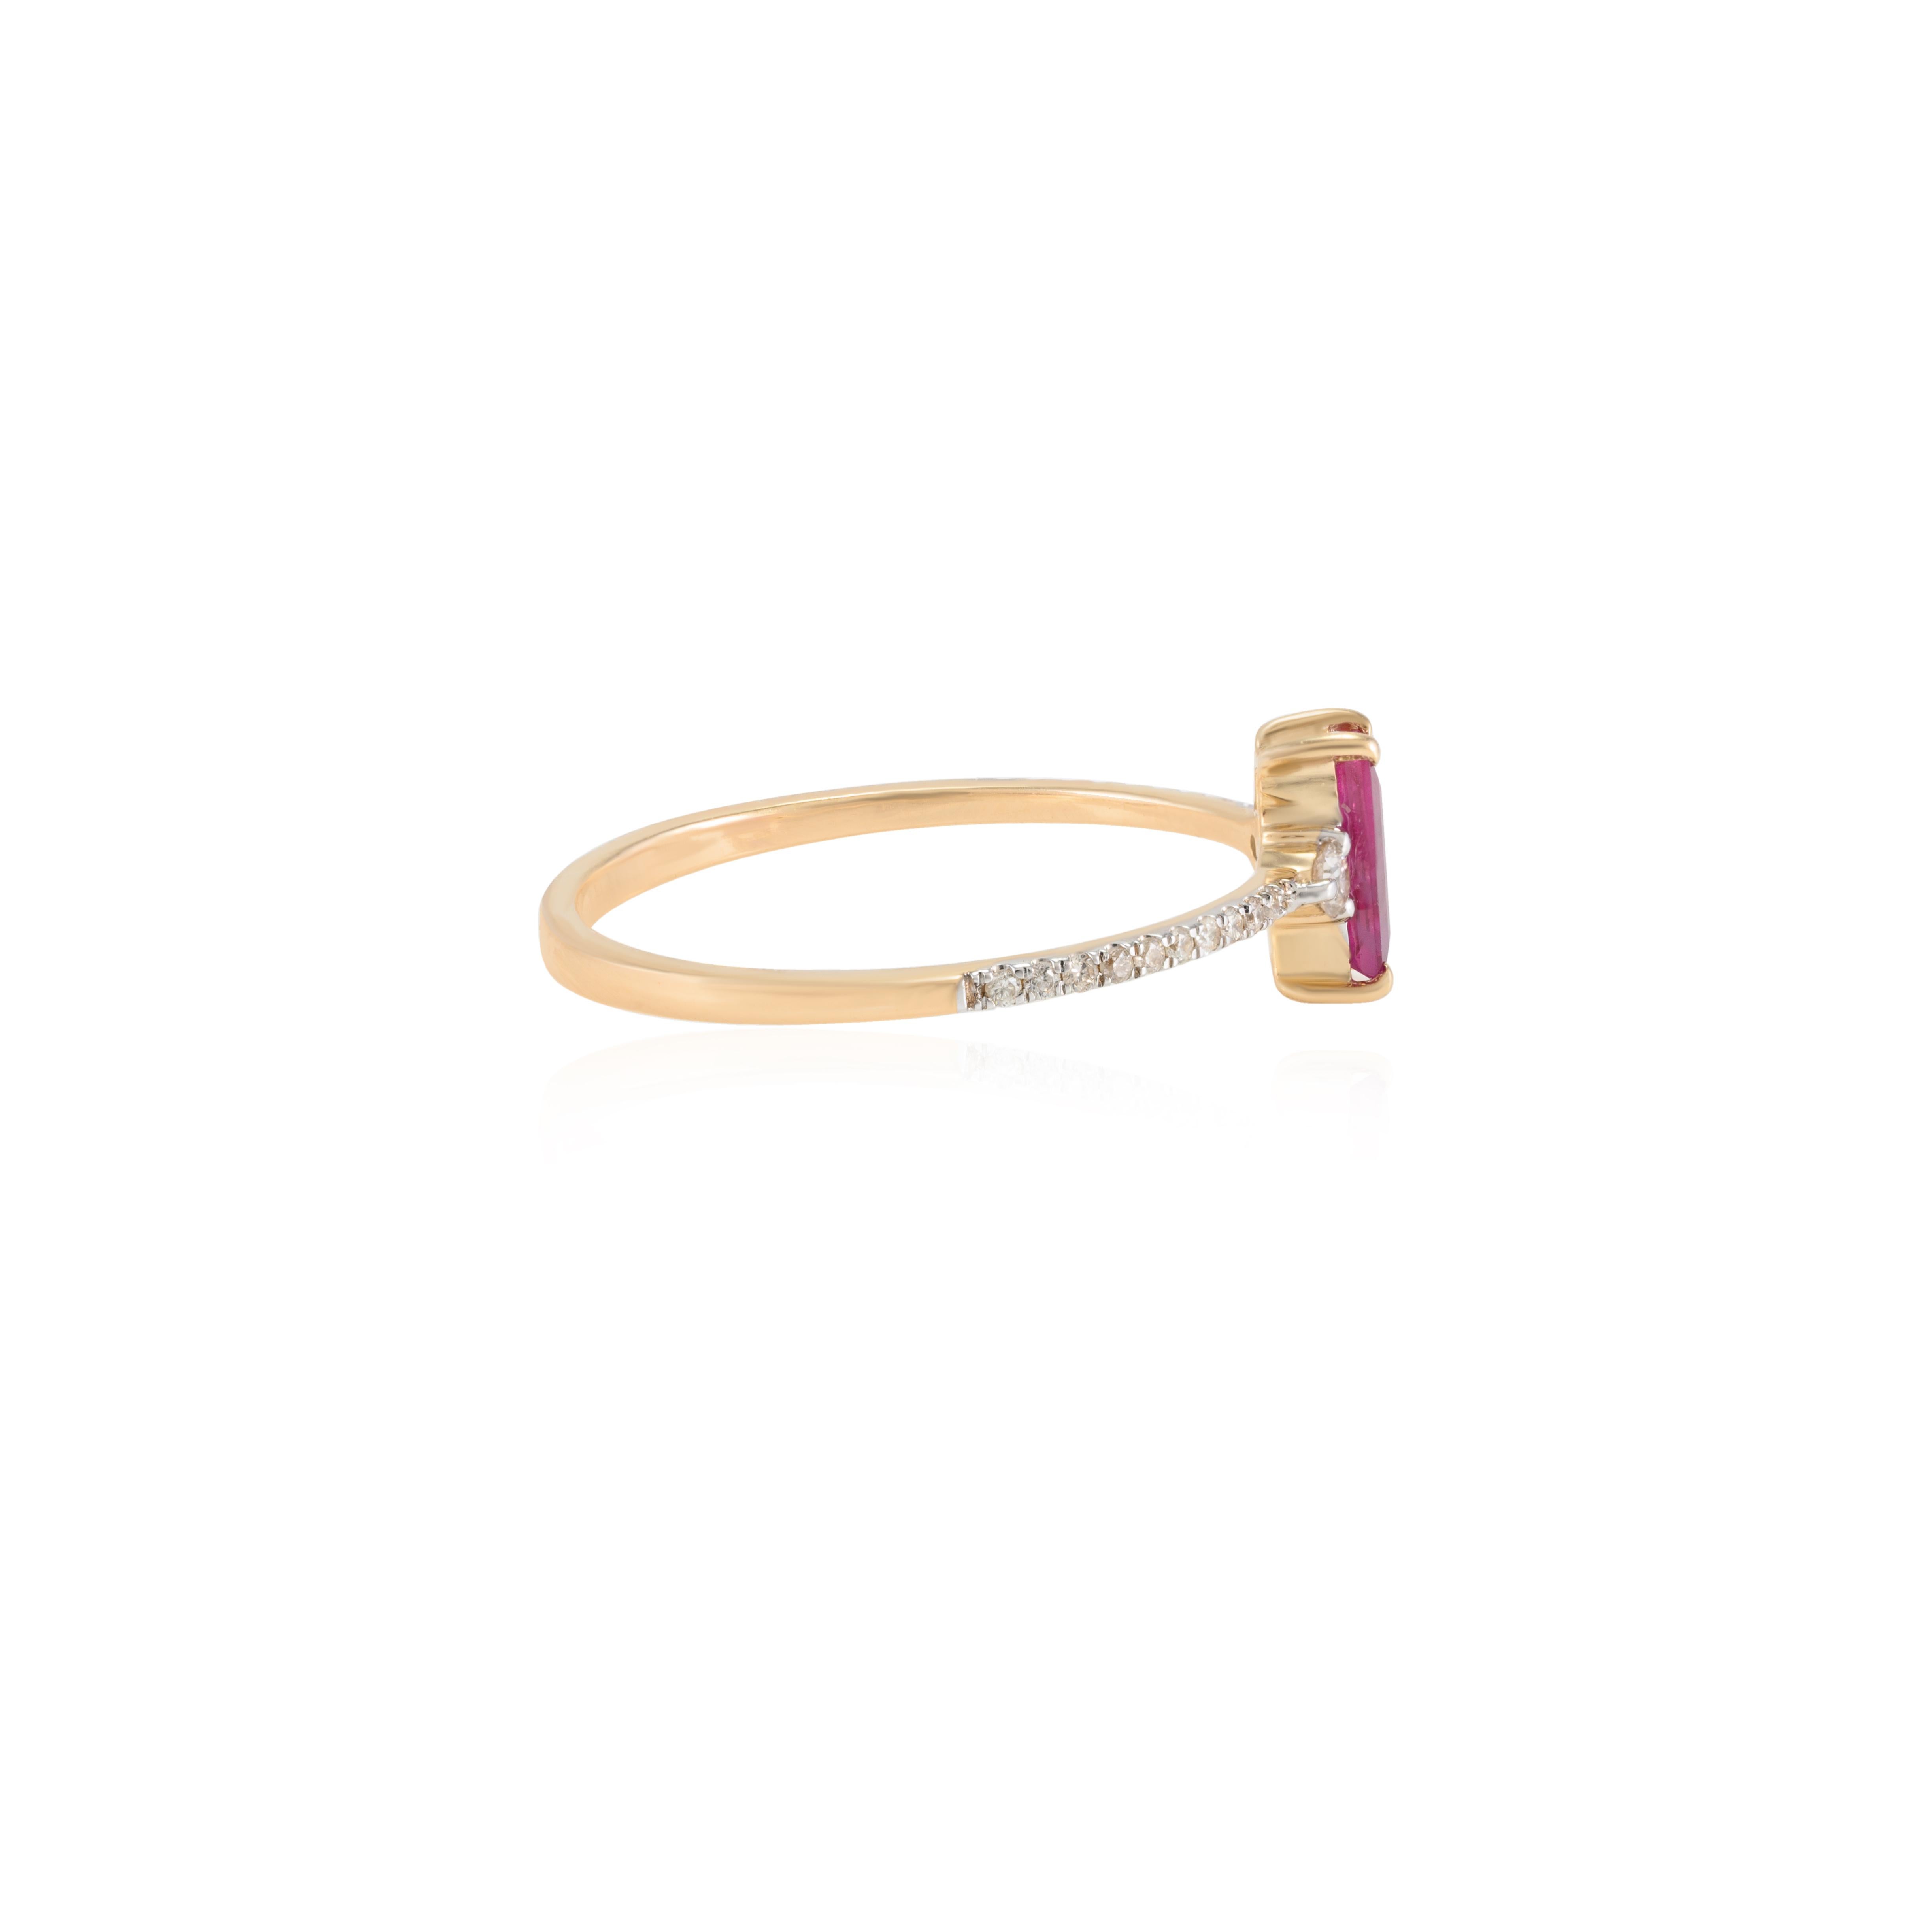 For Sale:  Baguette Cut Ruby and Diamond Stacking Ring in 14k Solid Yellow Gold For Her 7